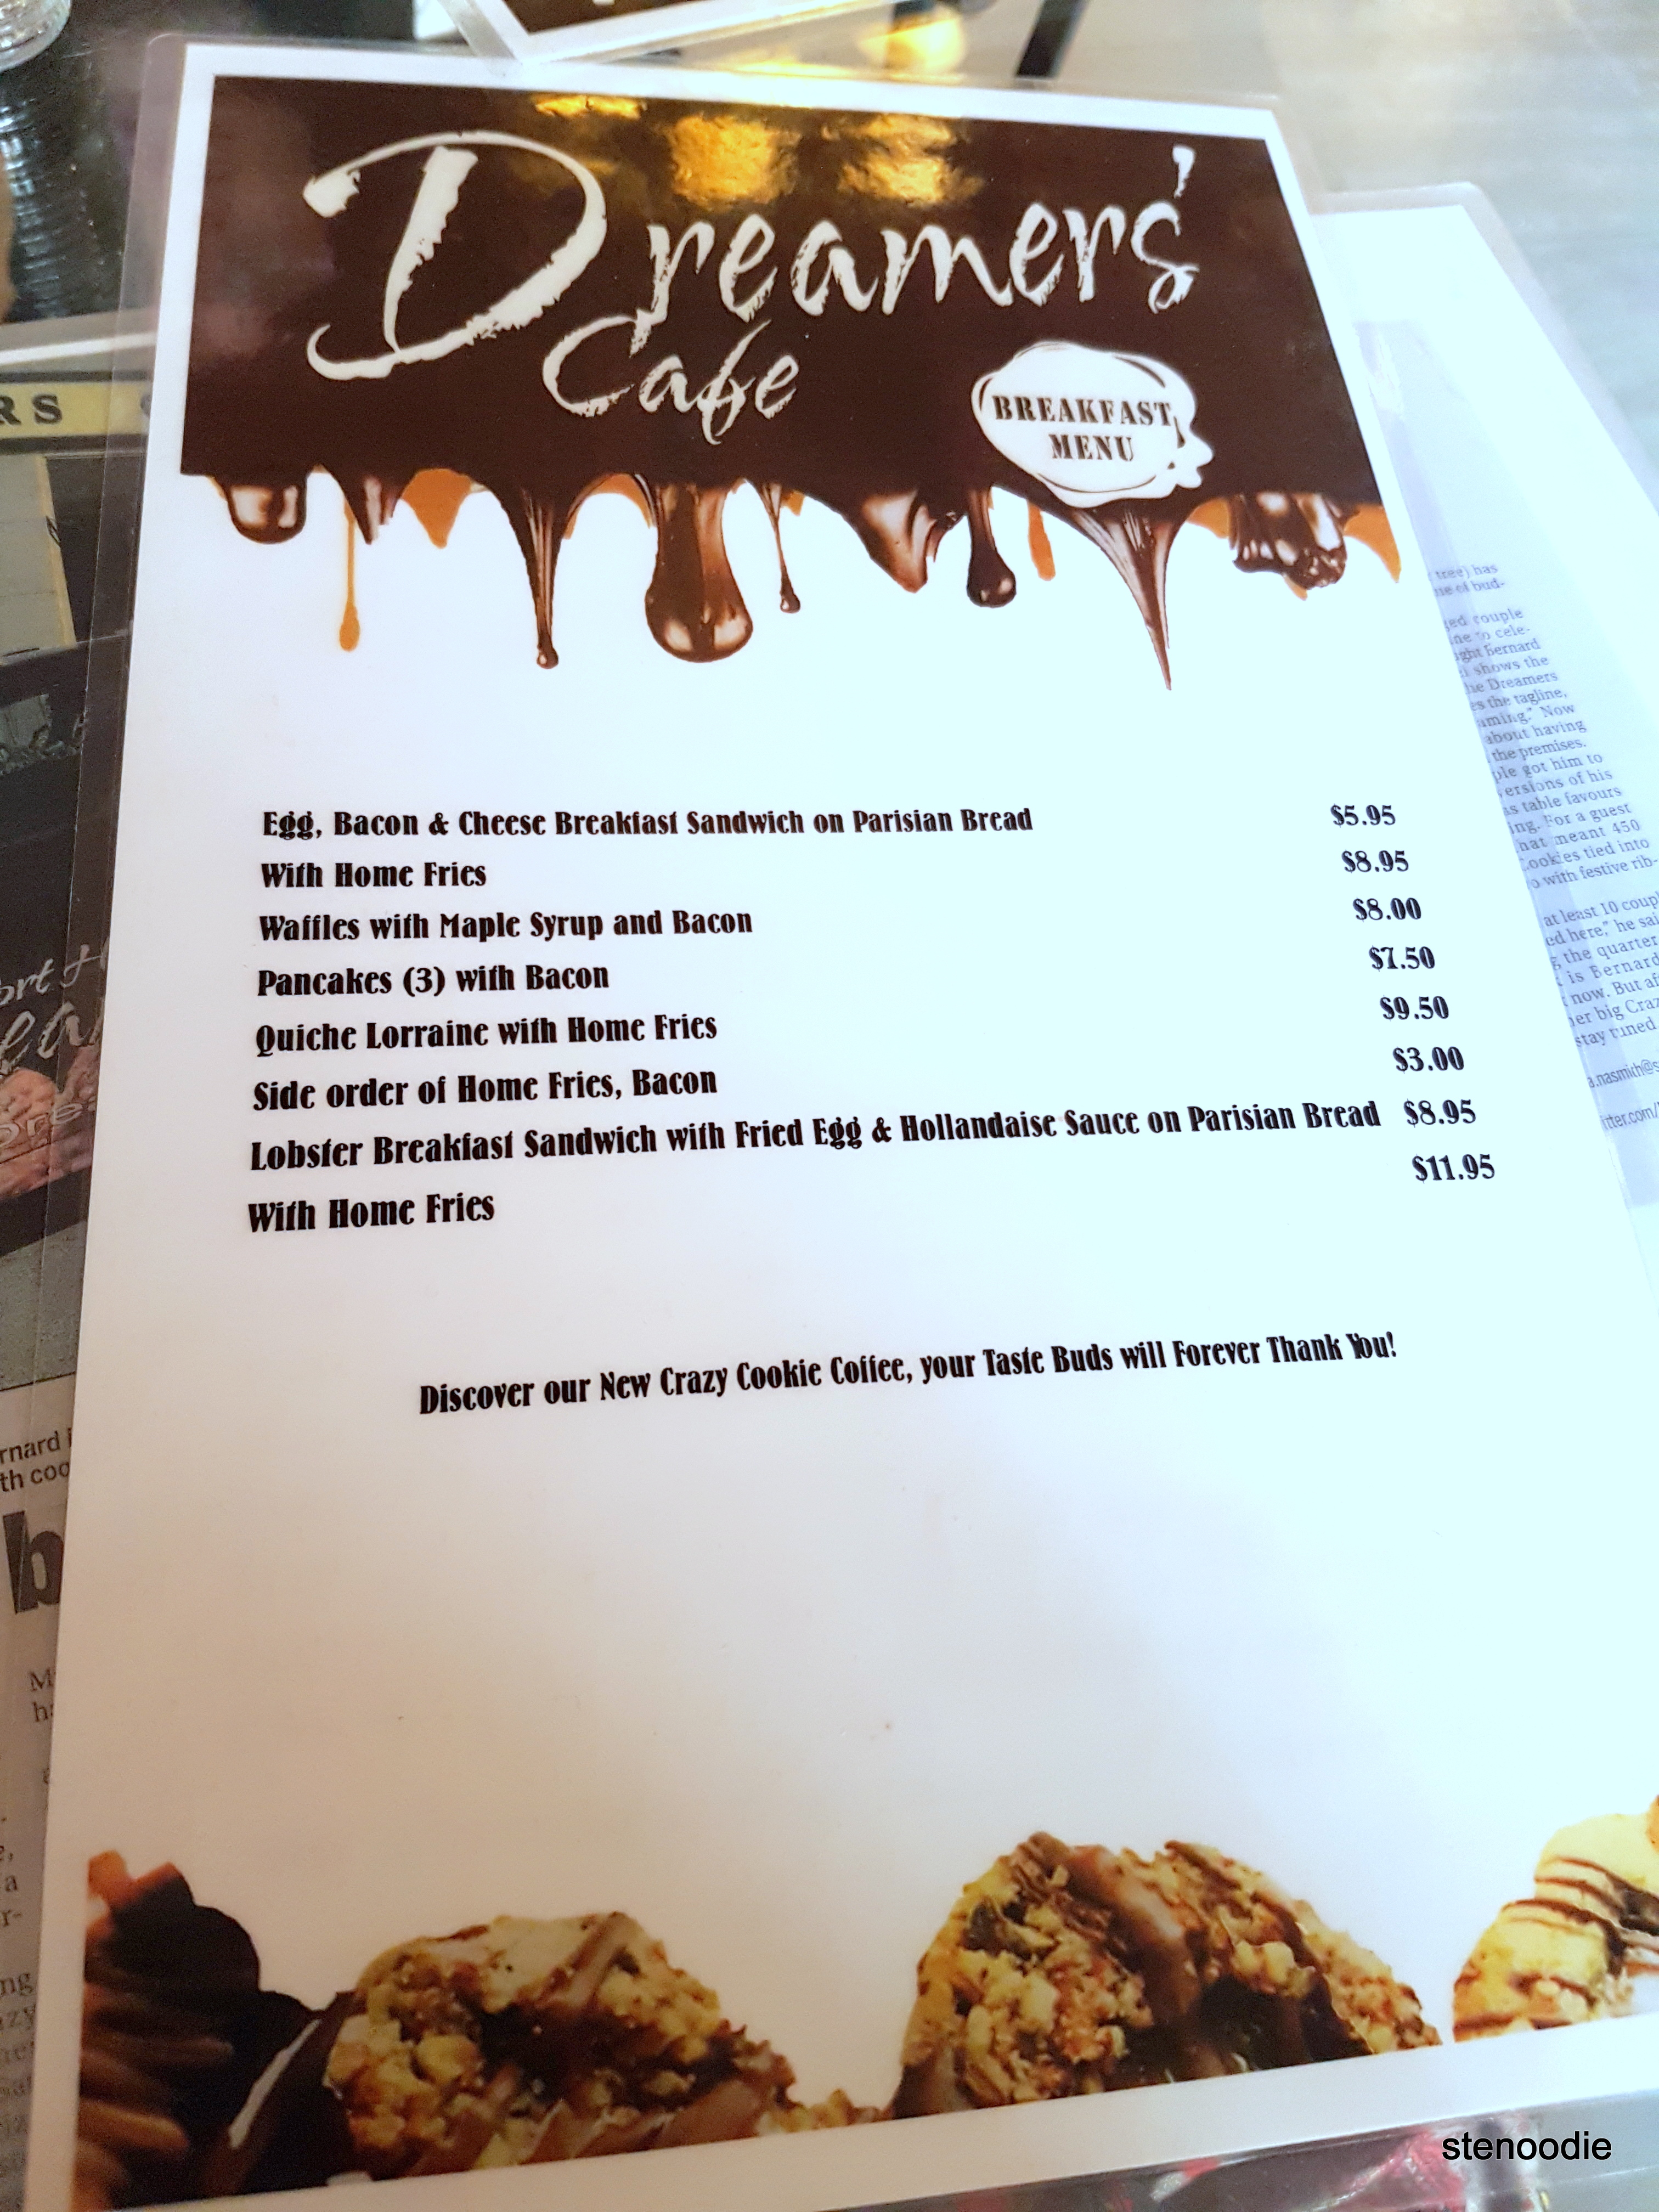 Dreamers' Cafe breakfast menu and prices